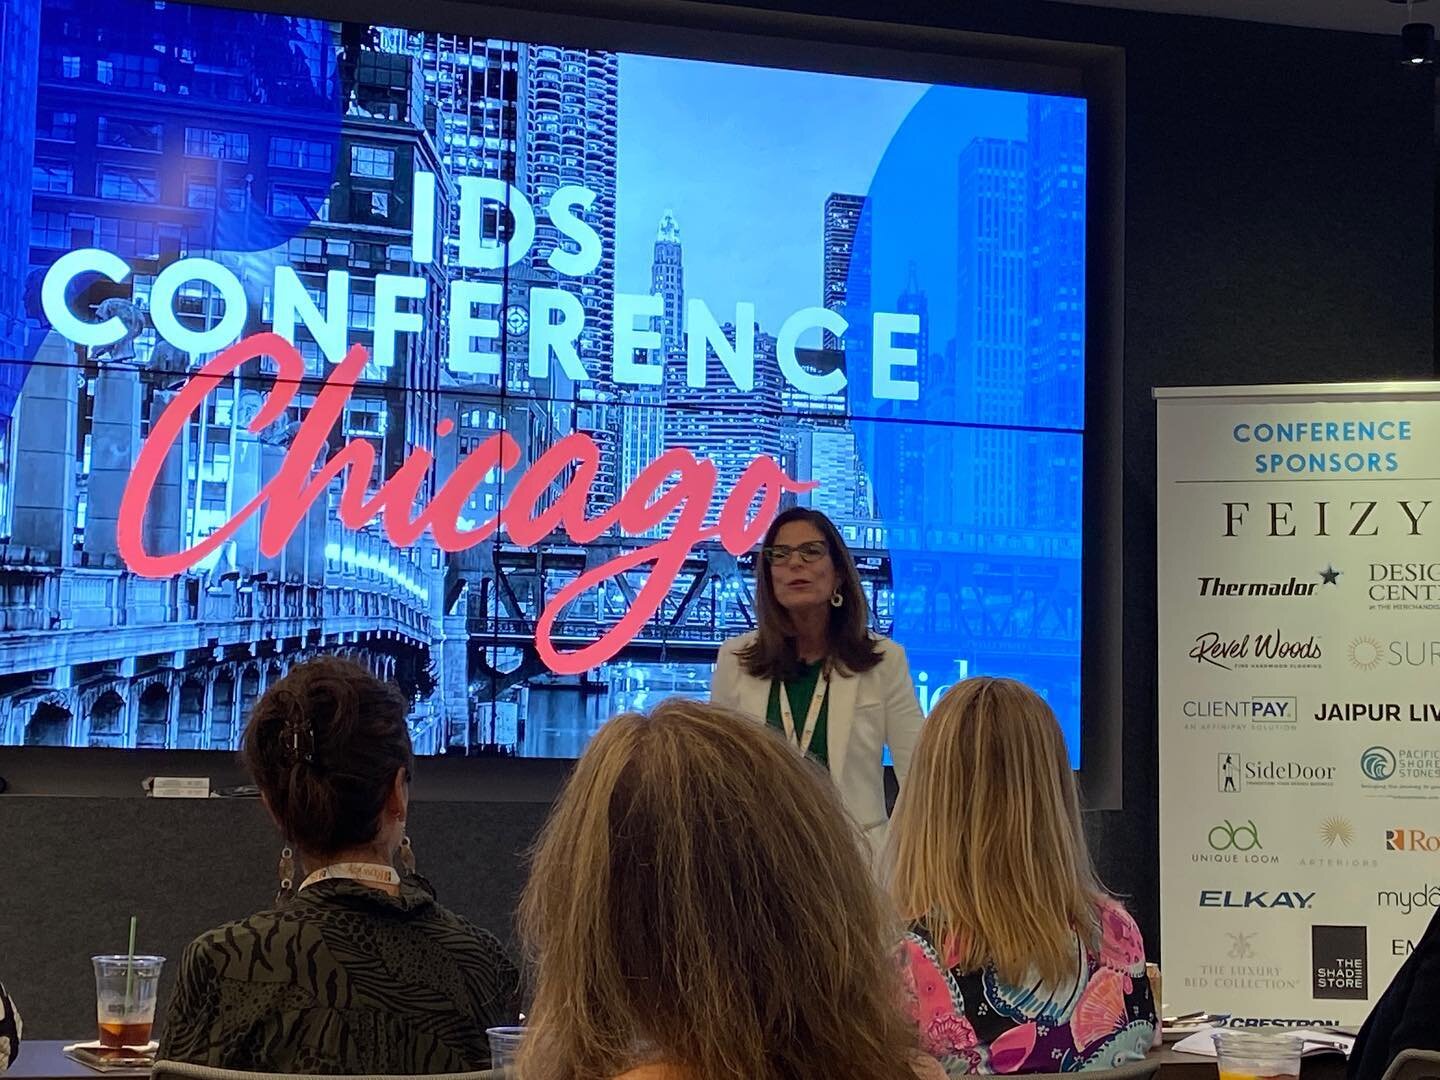 Enjoying @luannnigara LuAnn Nigara&rsquo;s keynote address to kick off our IDS Conference @idsnational in the Windy City.  #idsnational #keynotespeaker #inspirationalspeaker #idsconference2022